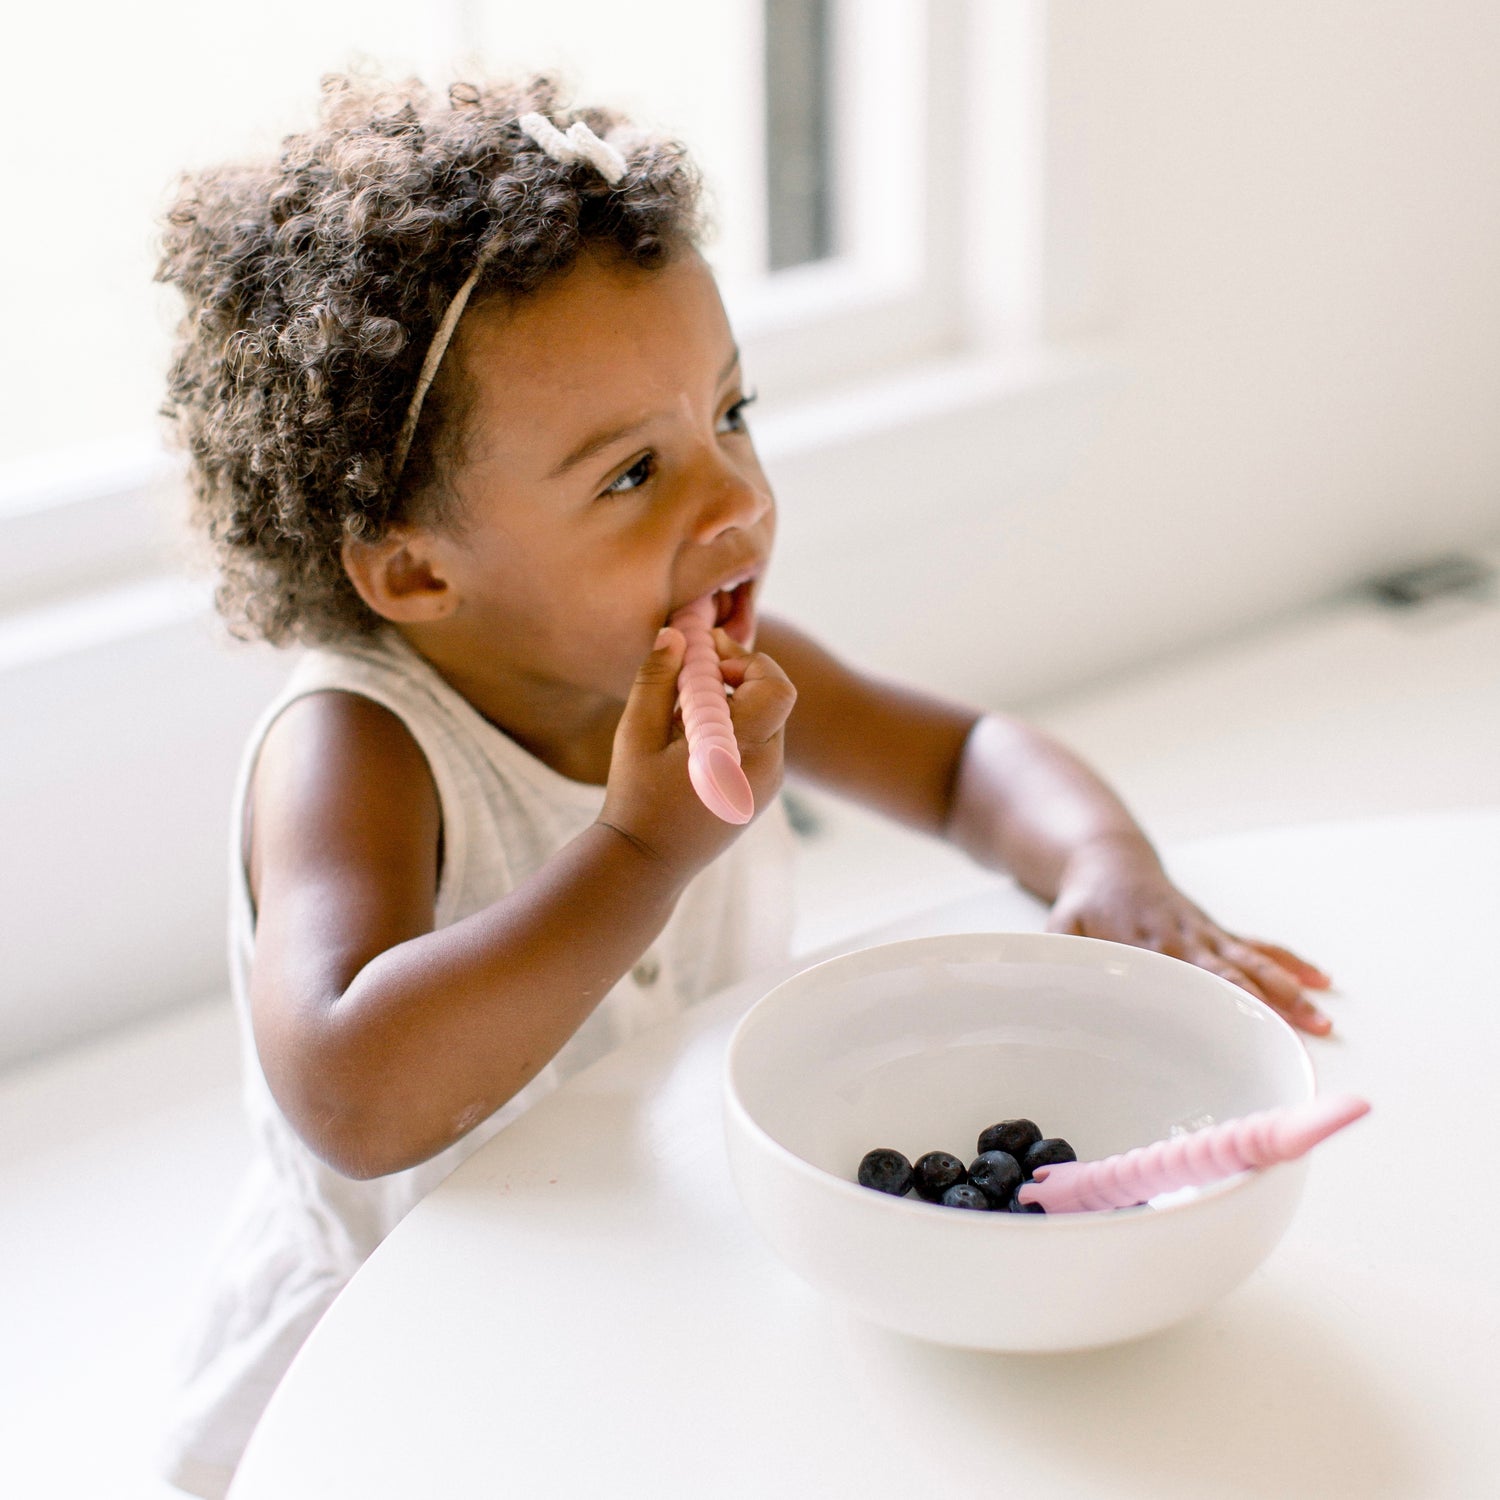 Toddler eating with tensils